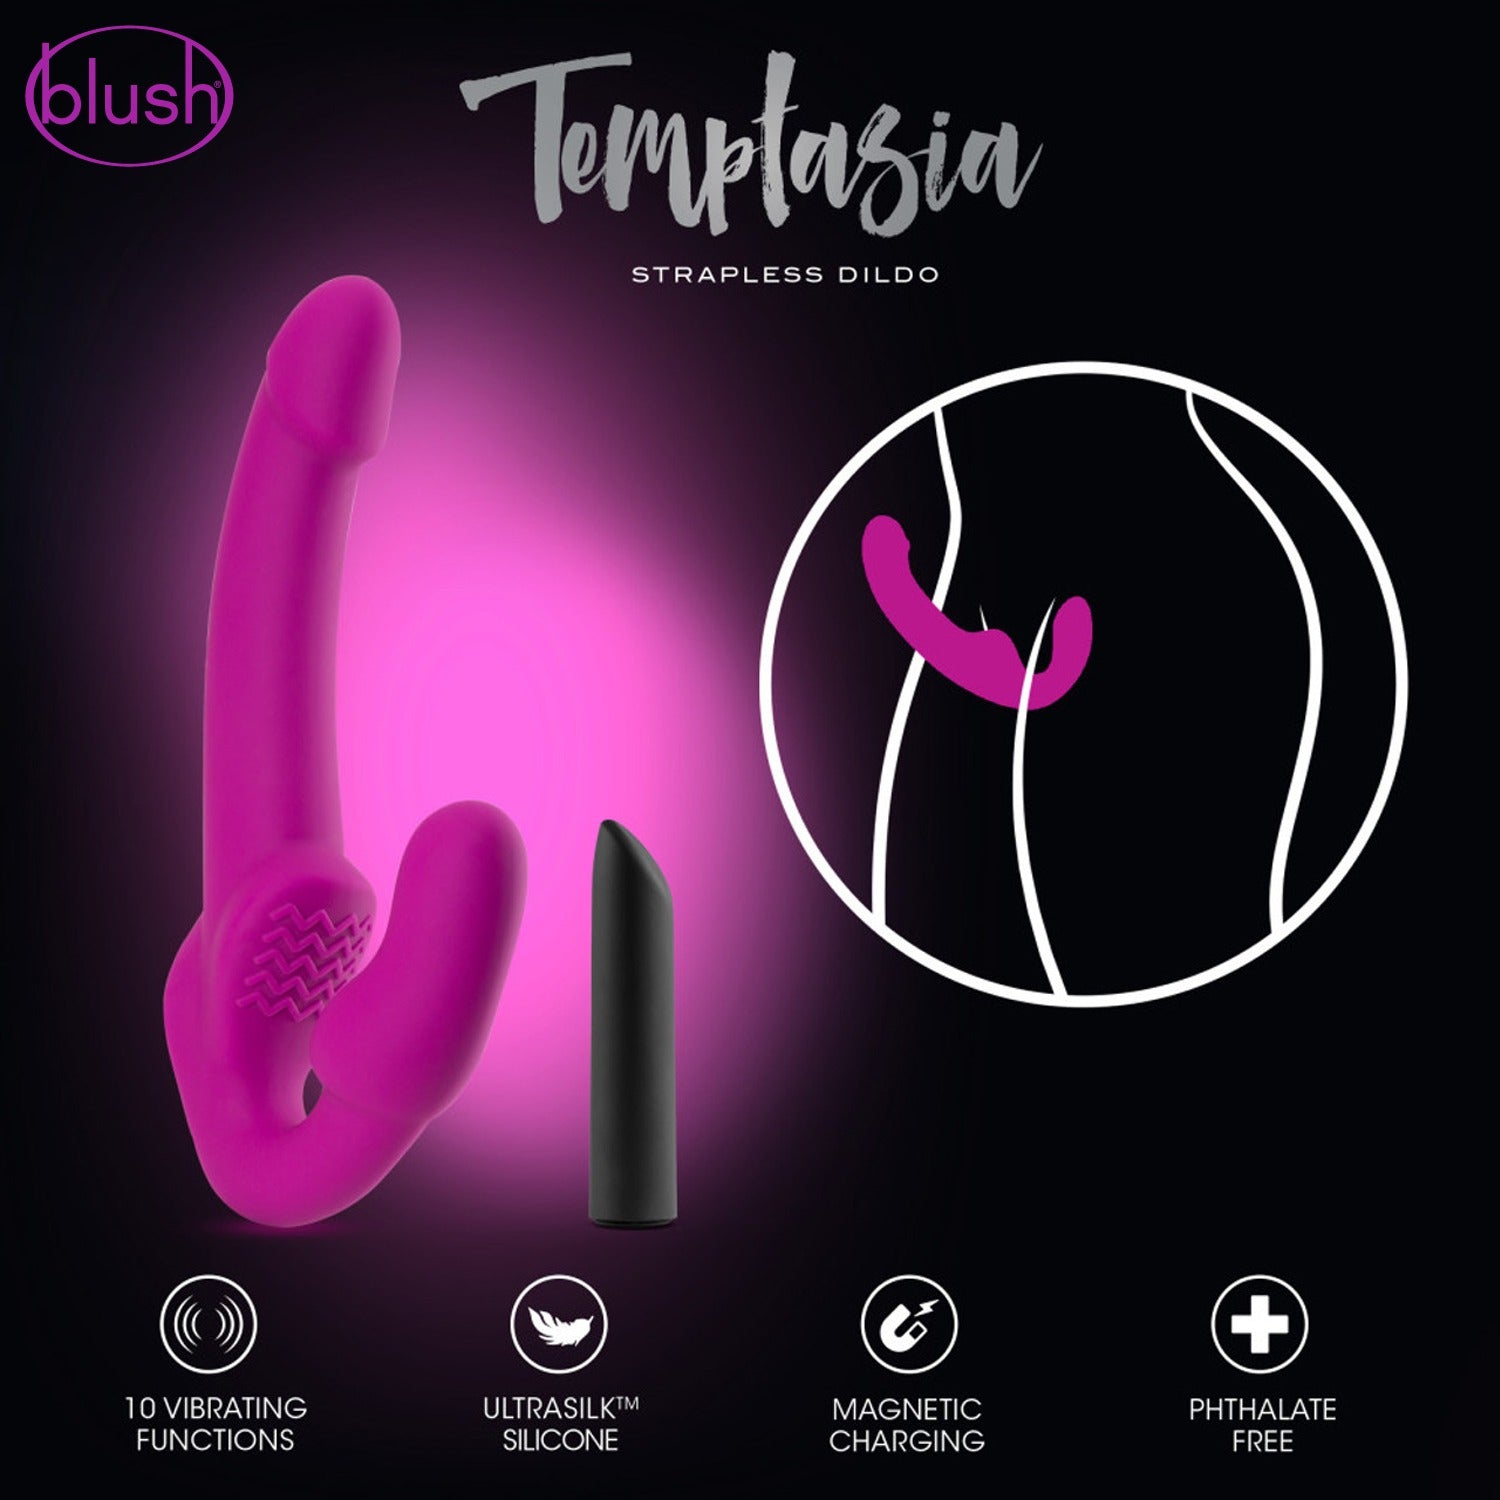 Temptasia Strapless Dildo. On the left side of the image is the blush Estella Strapless Dildo, with an image of the bullet vibe included beside. On the right side enclosed in a circle is an illustration of how to wear the product. On the bottom are product feature icons for: 10 vibrating functions; Ultrasilk Silicone; Magnetic charging; Phthalate free.